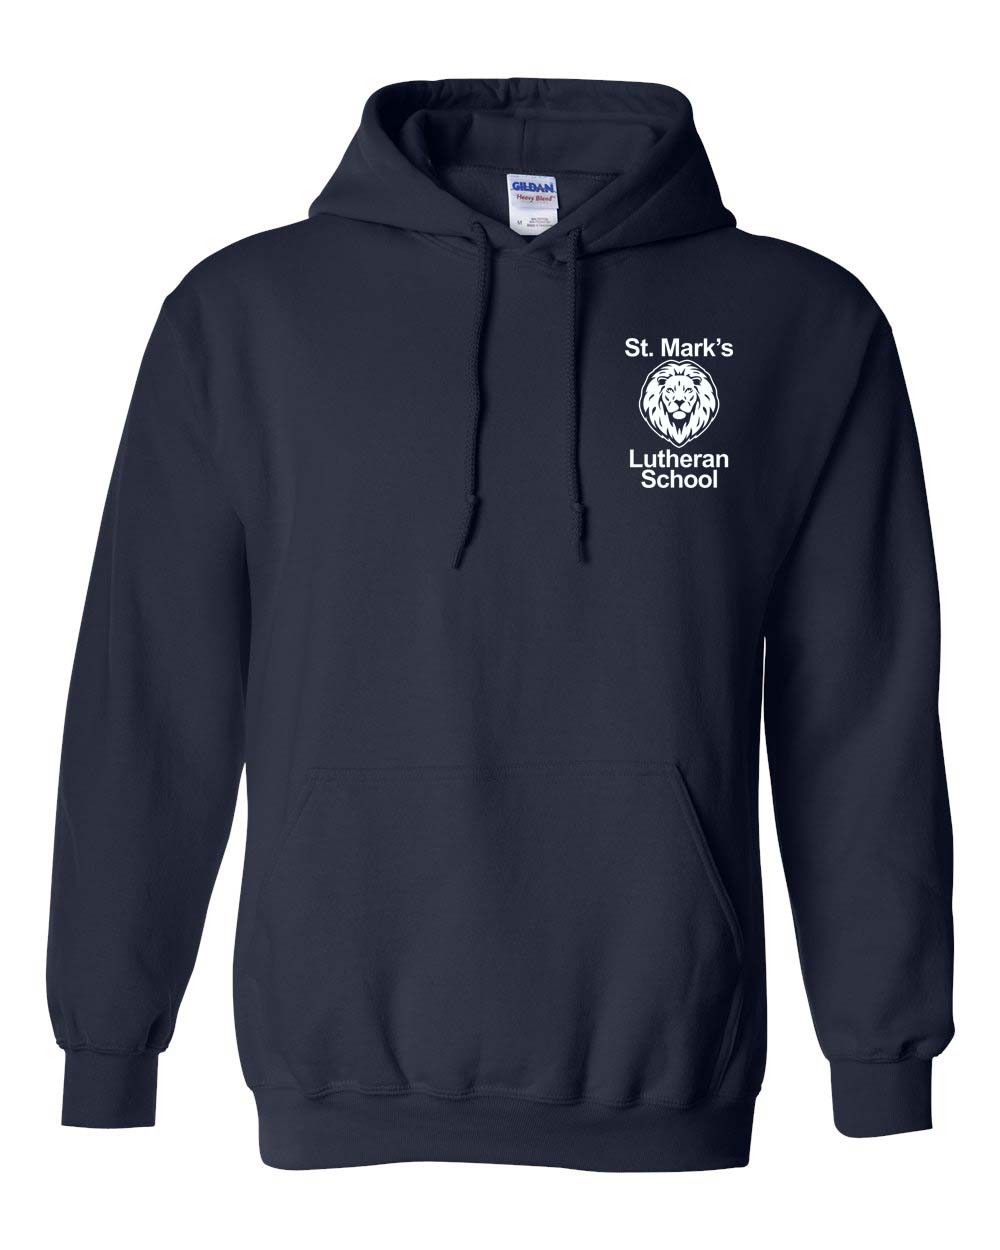 SMLS Staff Pullover Hoodie w/ School Logo - Please Allow 2-3 Weeks for Delivery